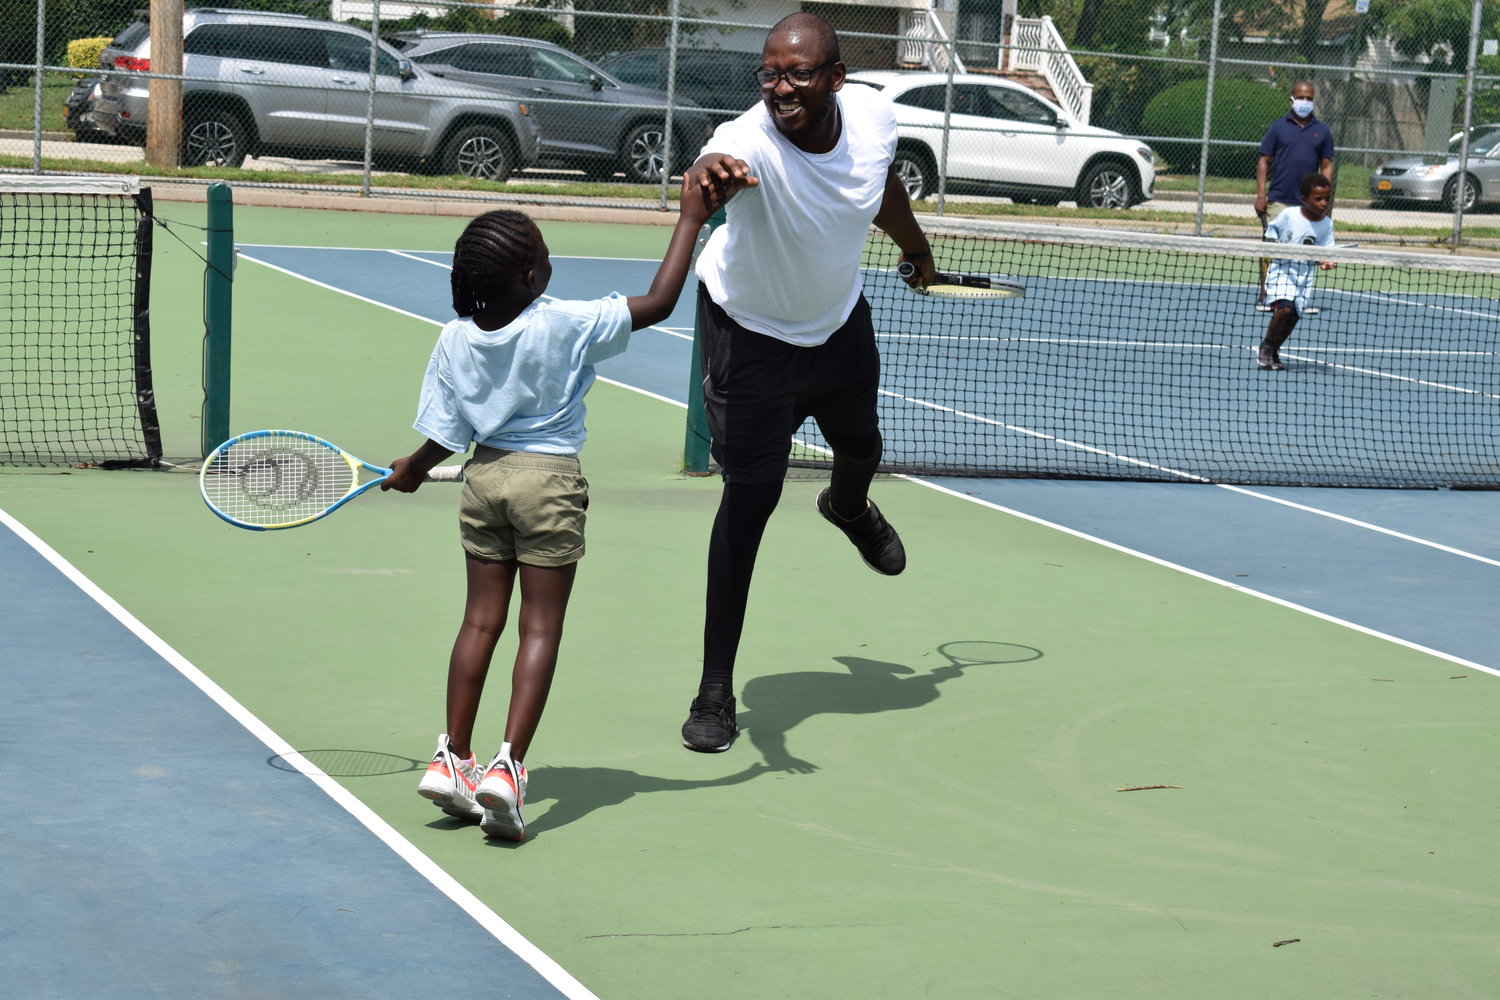 Obeng Dwamena high-fived his daughter, Aneesa Dwamena, 6, during a friendly game in the Learning Institute of Tennis, Life Skills and Sportsmanship’s summer program.